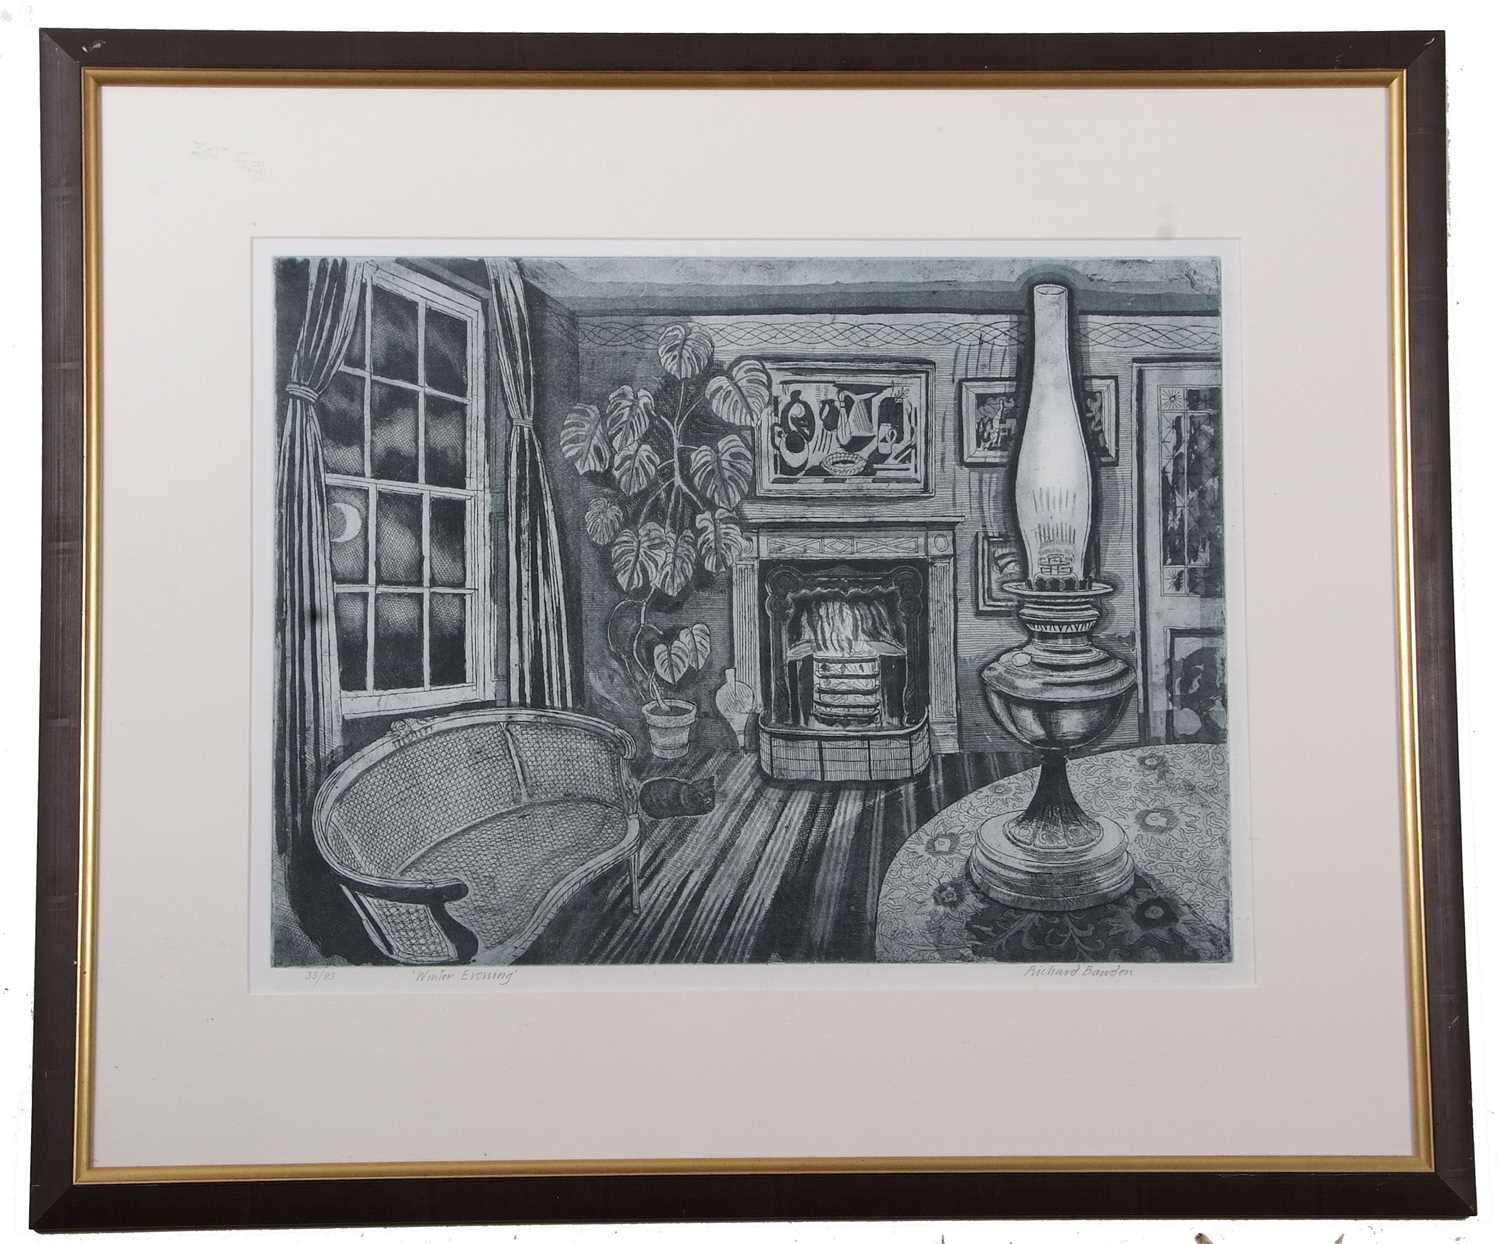 Richard Bawden (British, b.1936), 'Winter Evening', etching with aquatint, numbered 35/85 in pencil, - Image 3 of 3